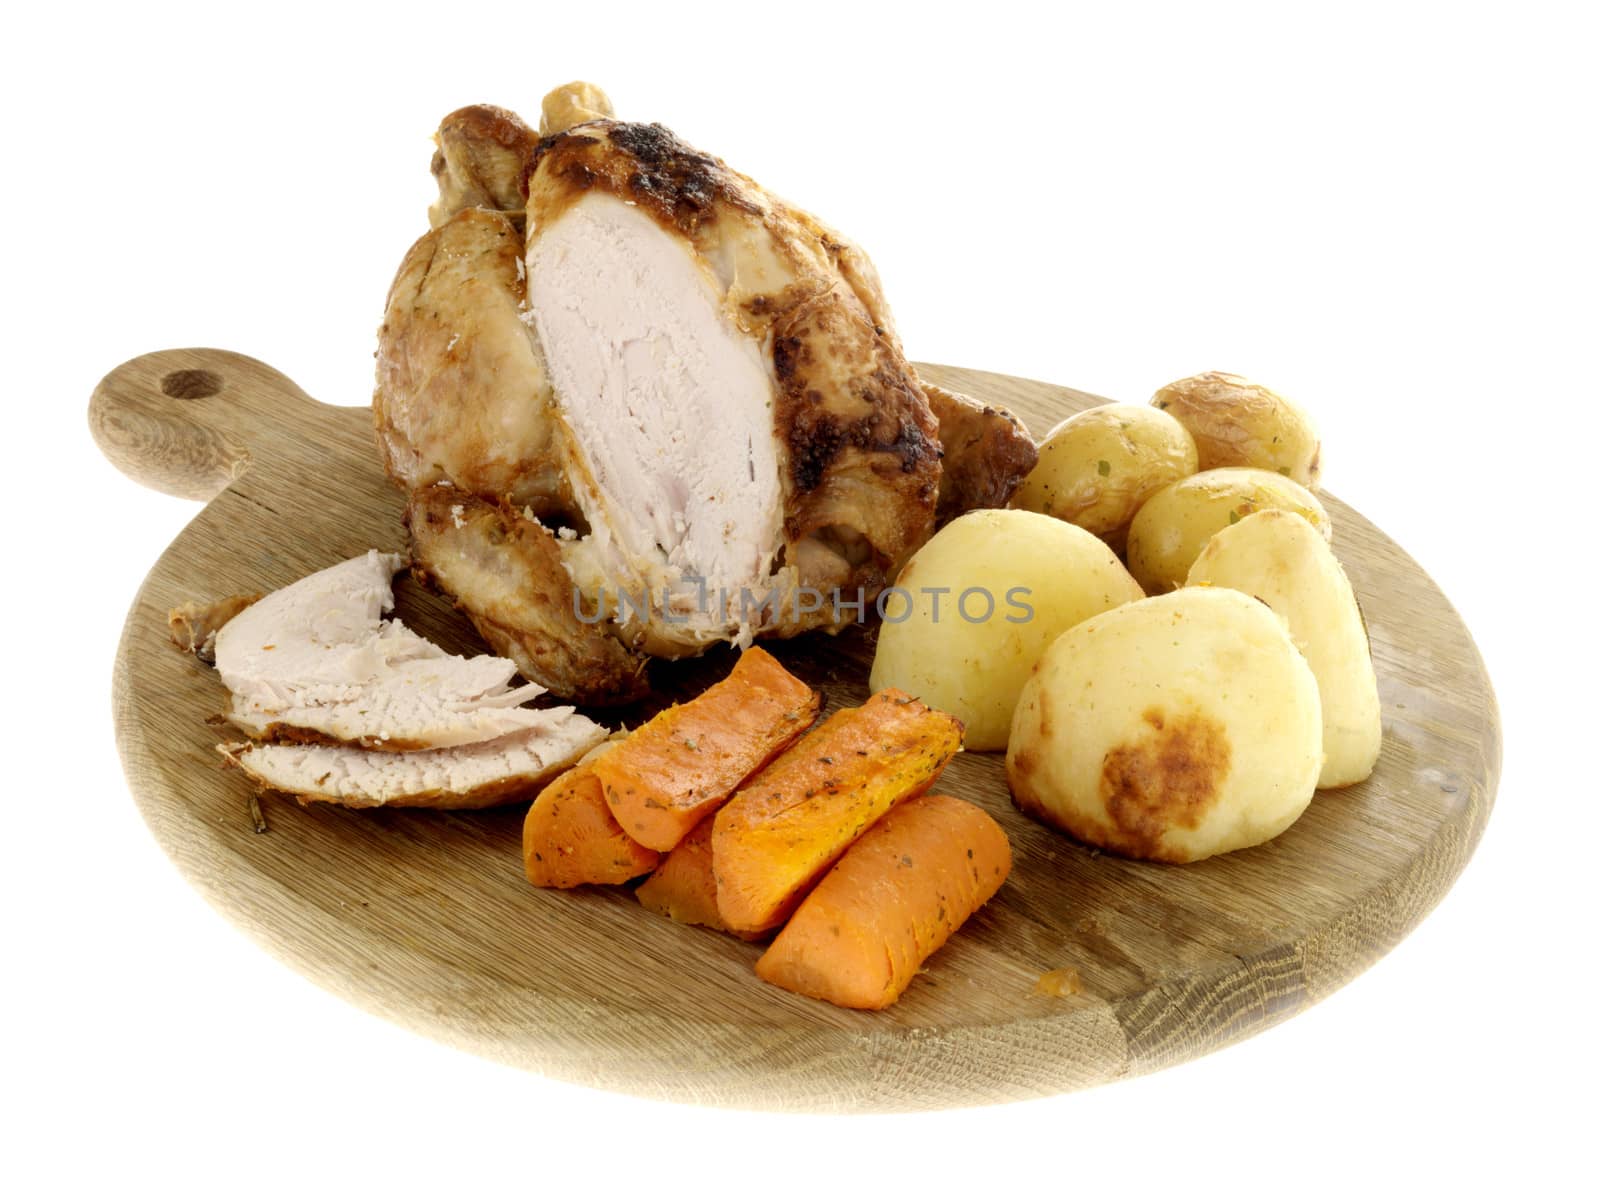 Roast Chicken with Vegetables by Whiteboxmedia